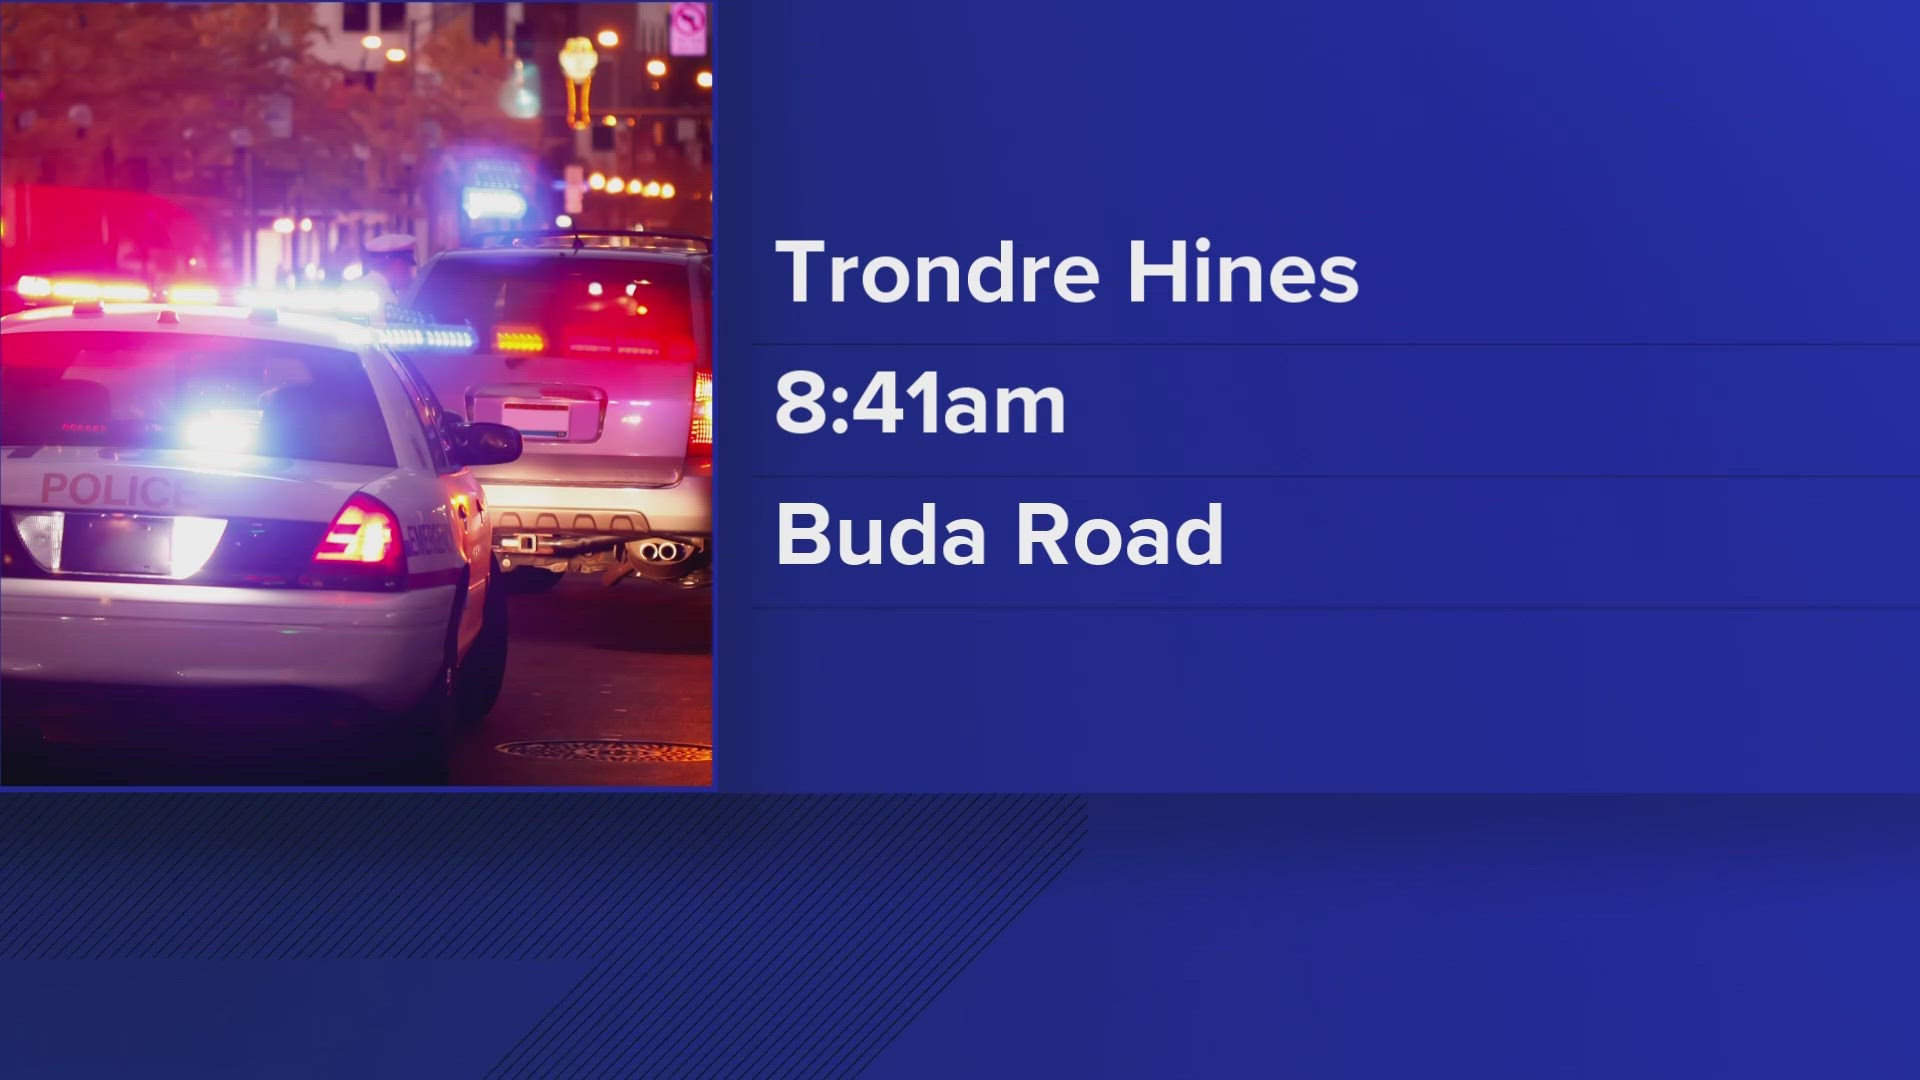 It was reported by witnesses that Trondre Hines broke into a camper at an address on Buda Road before a shot was fired at him, according to Cocke County deputies.